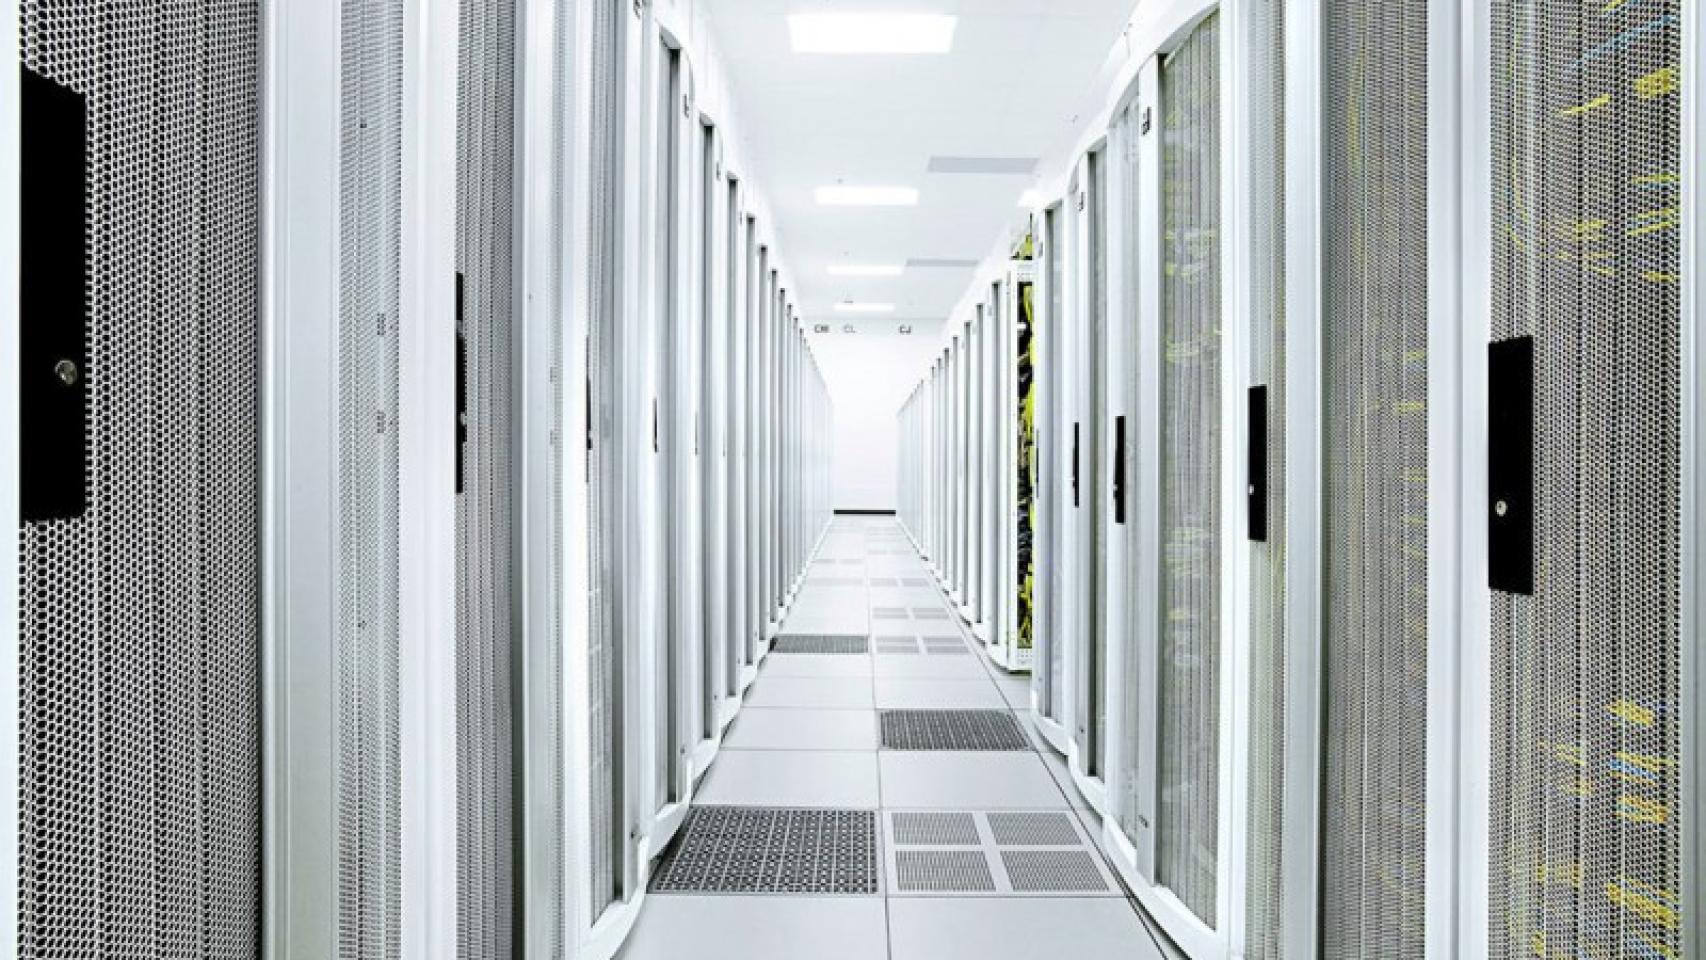 20190708 abb pilots automation solution for the next generation of data centers  53240